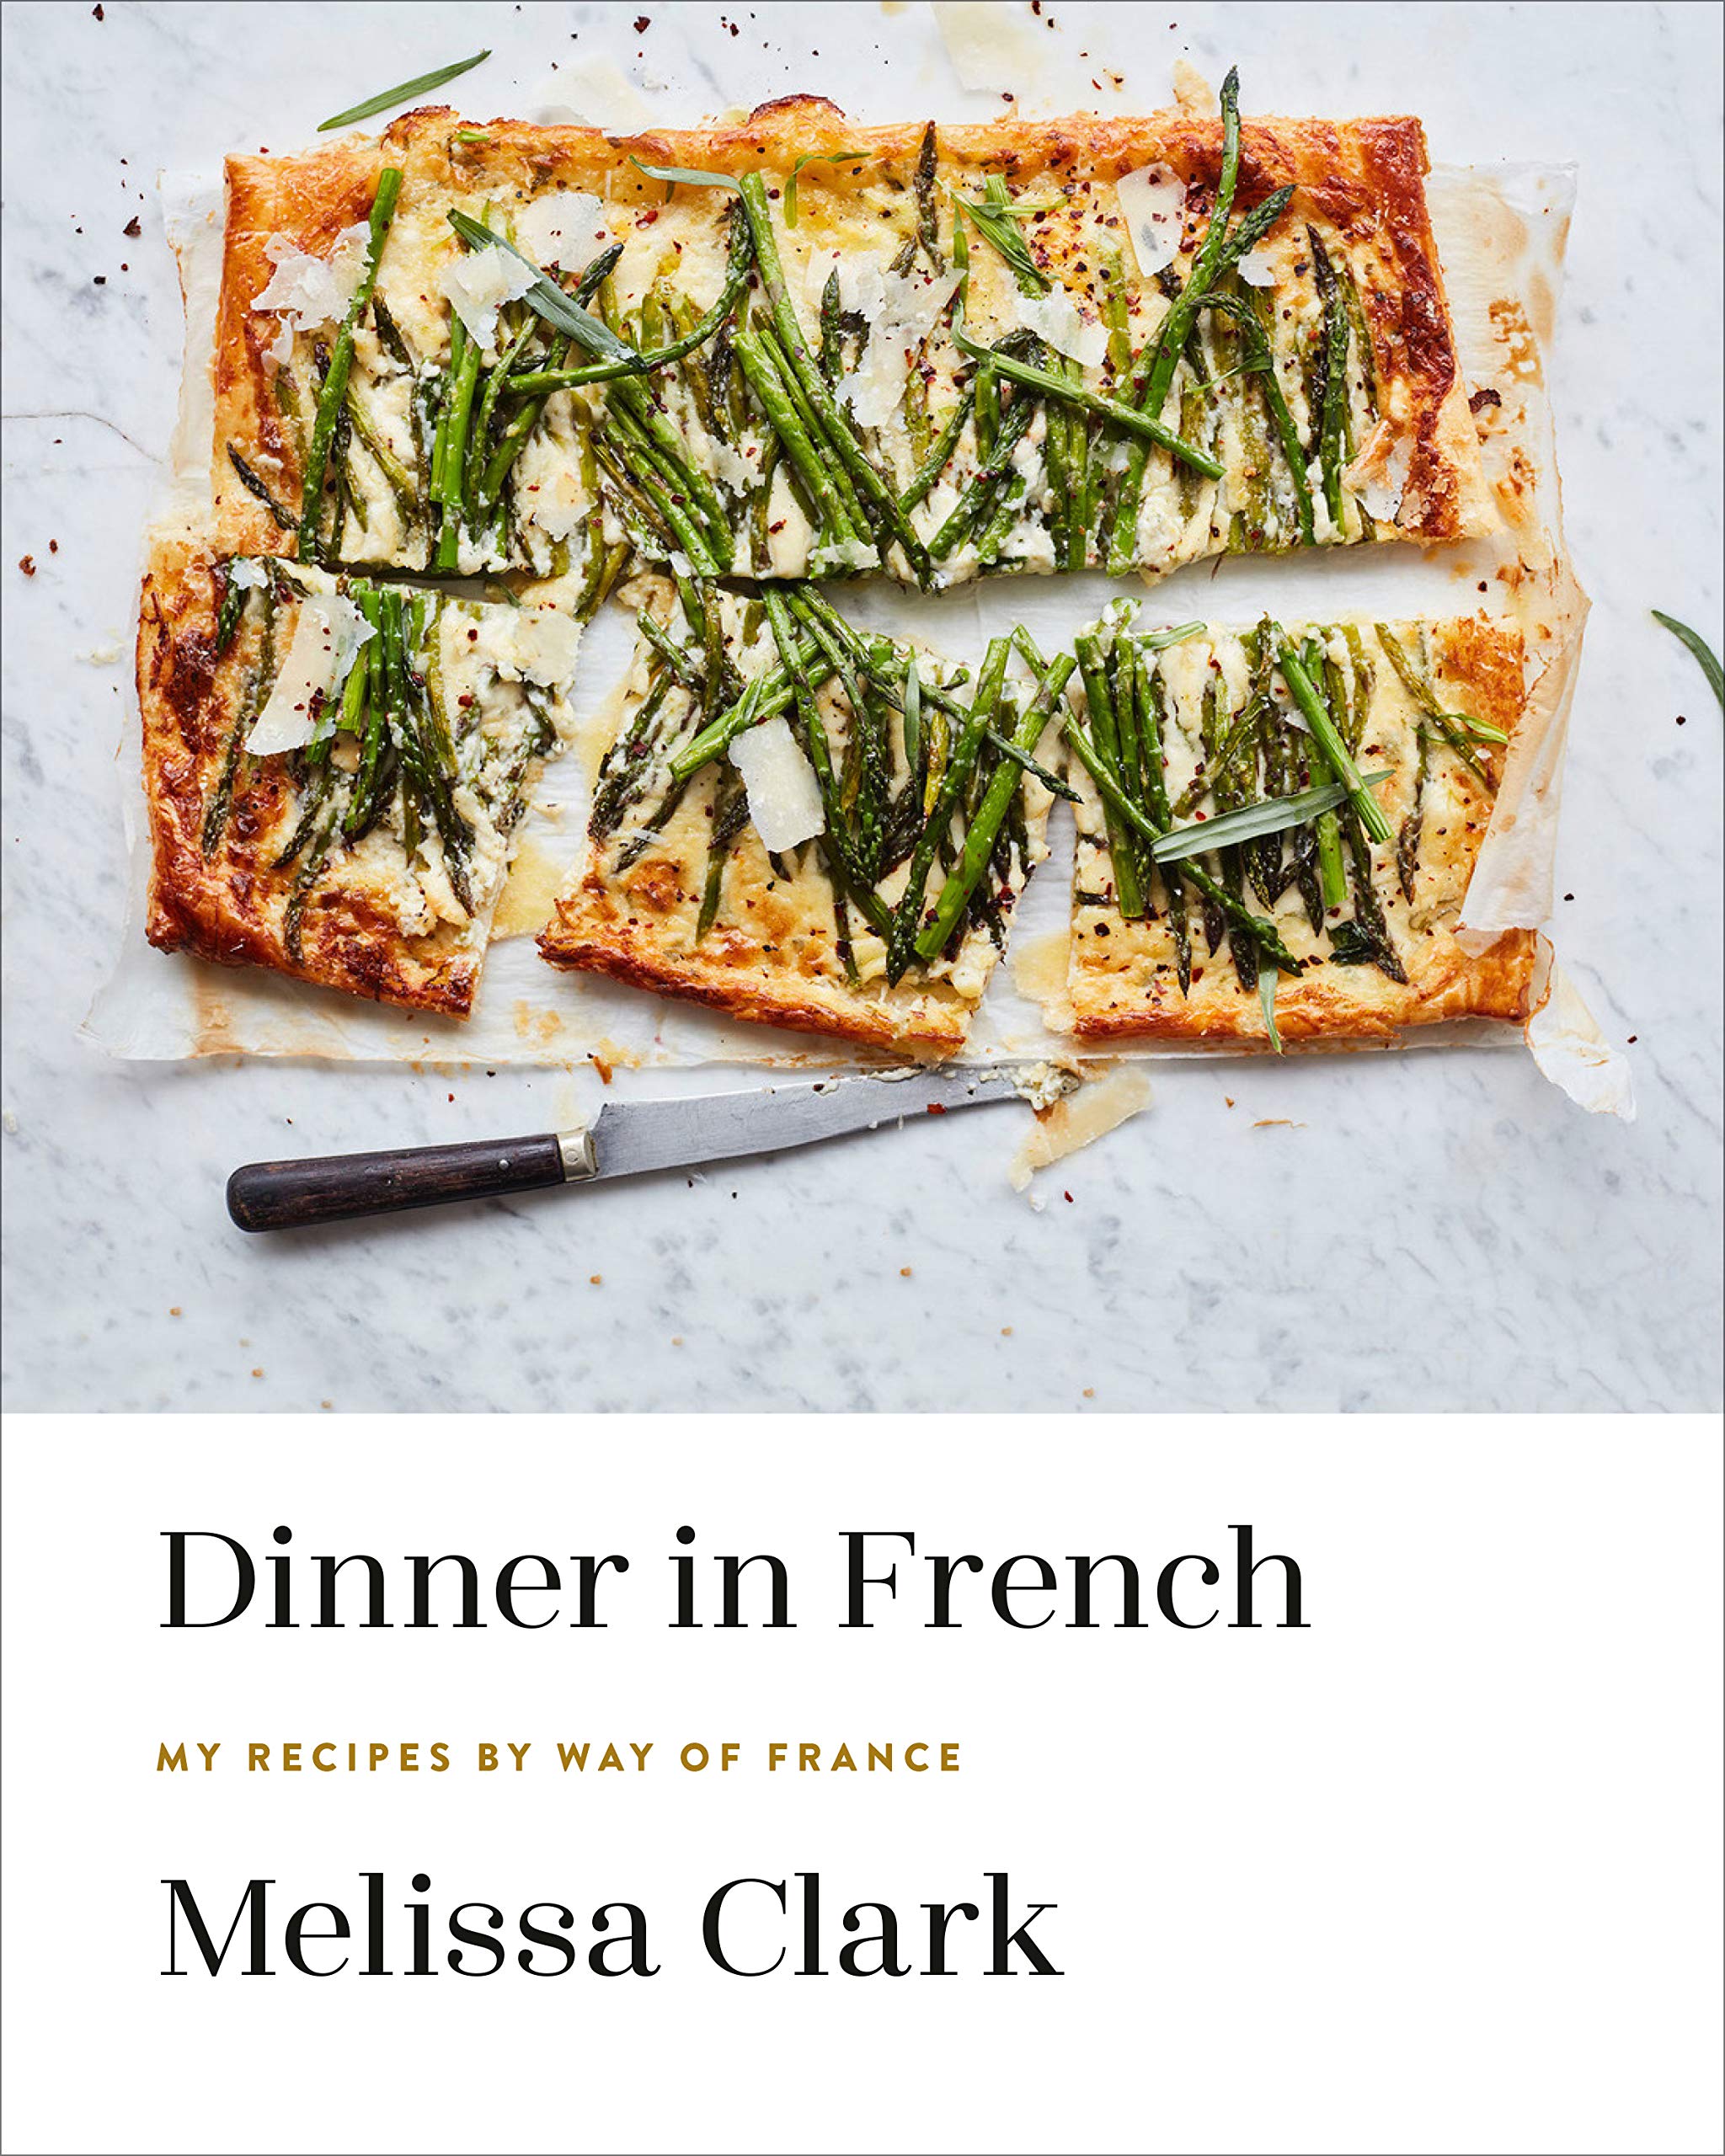 Dinner in French: My Recipes by Way of France: A Cookbook. (Melissa Clark) *Signed*